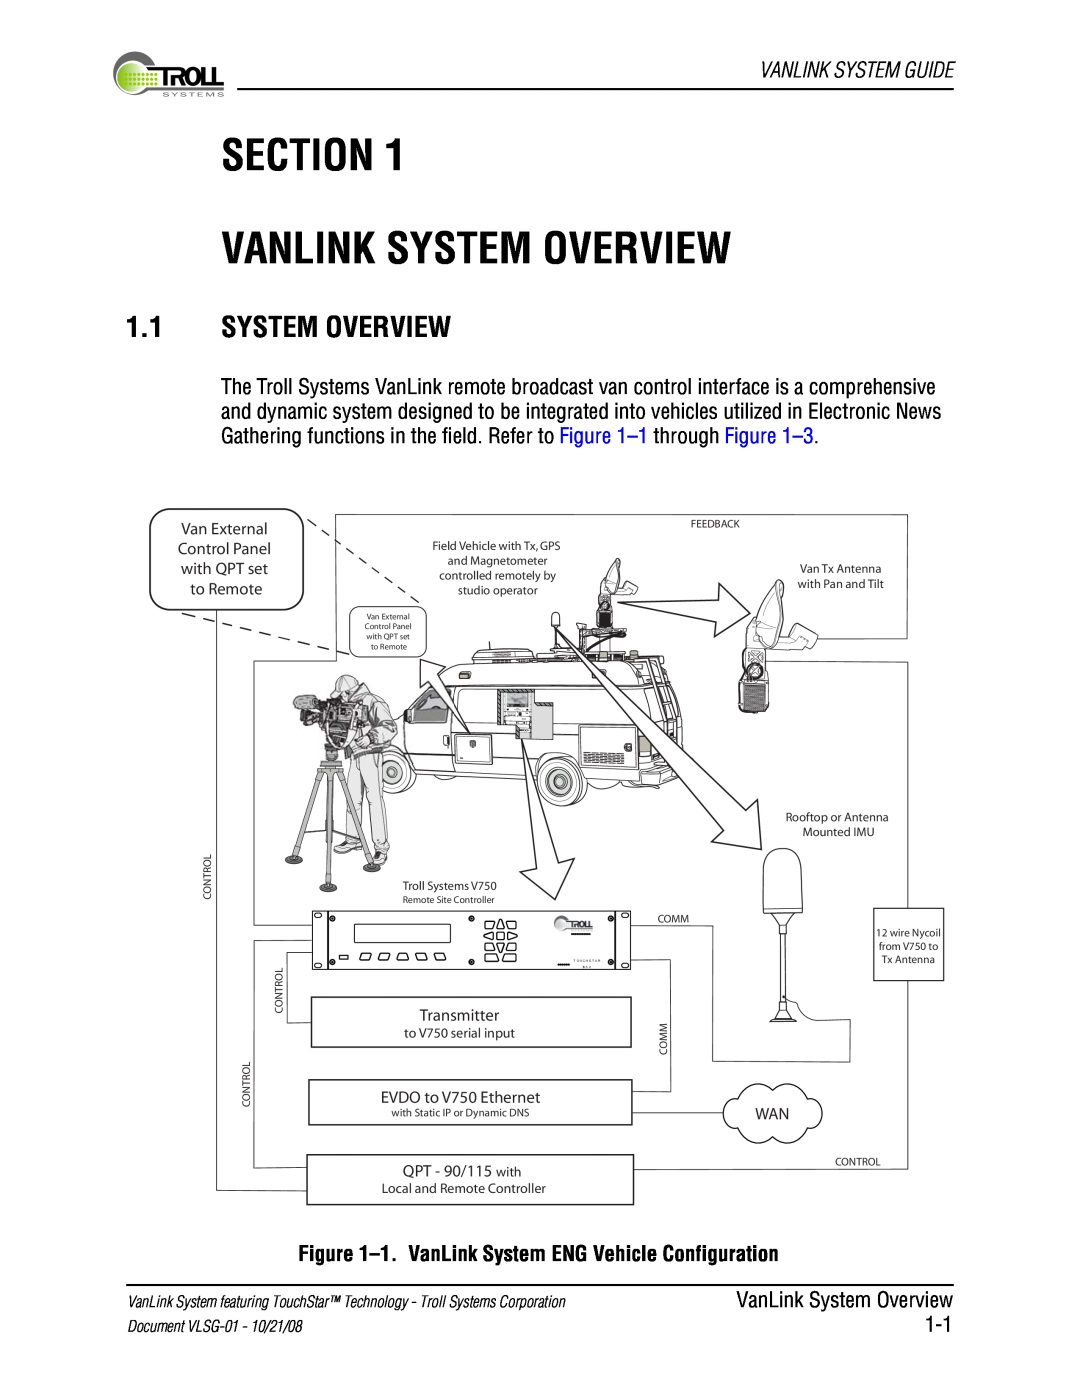 Kyocera VLSG-01 Section Vanlink System Overview, 1.1SYSTEM OVERVIEW, Vanlink System Guide, Transmitter, QPT - 90/115 with 